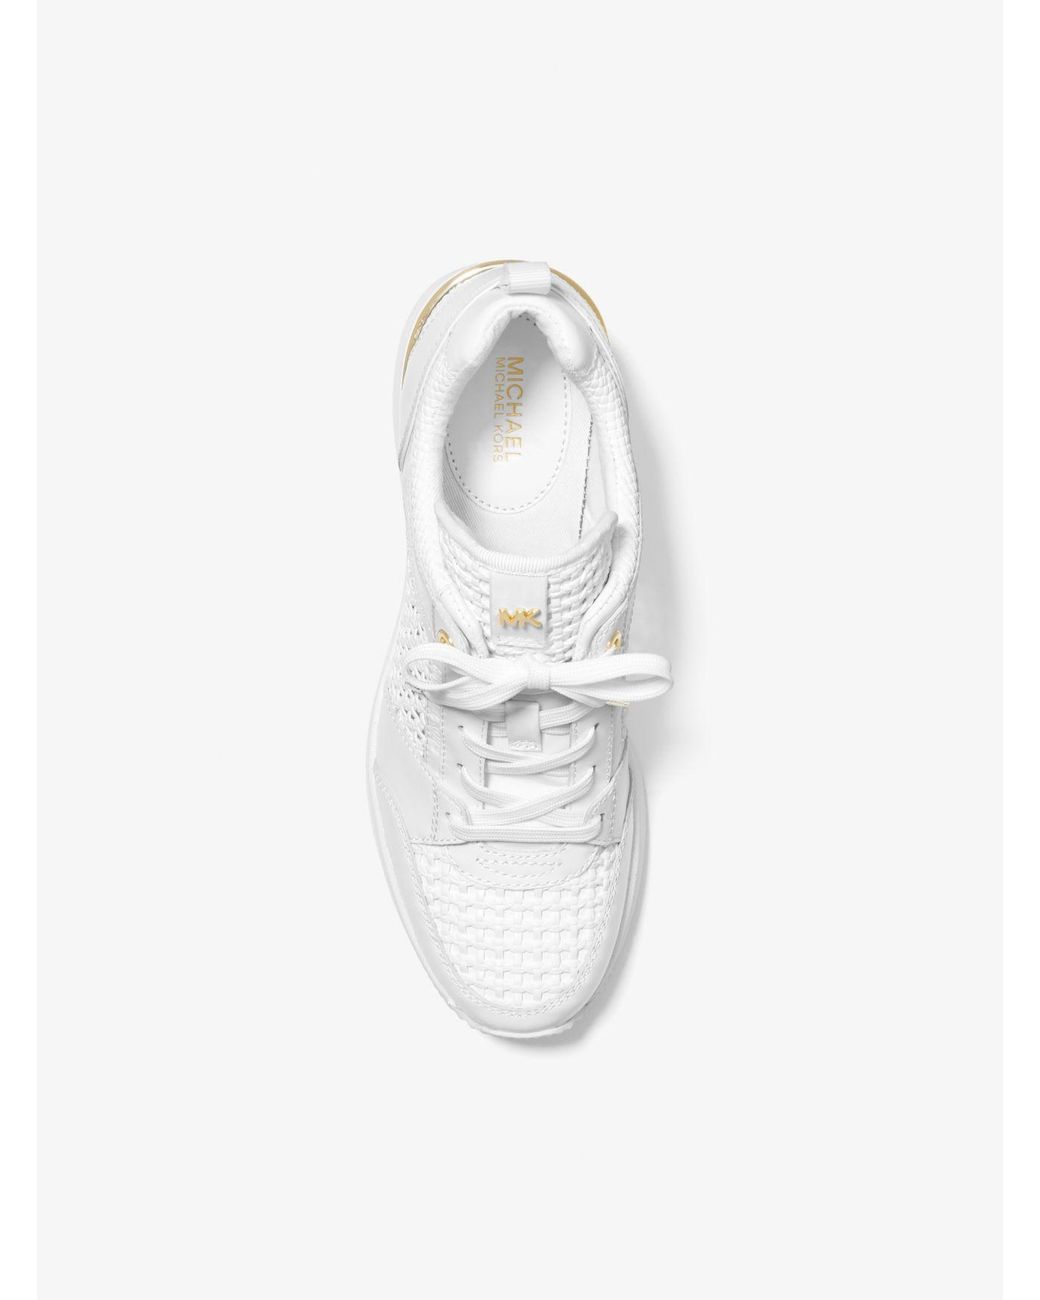 Michael Kors Georgie Woven Leather Trainer in White | Lyst